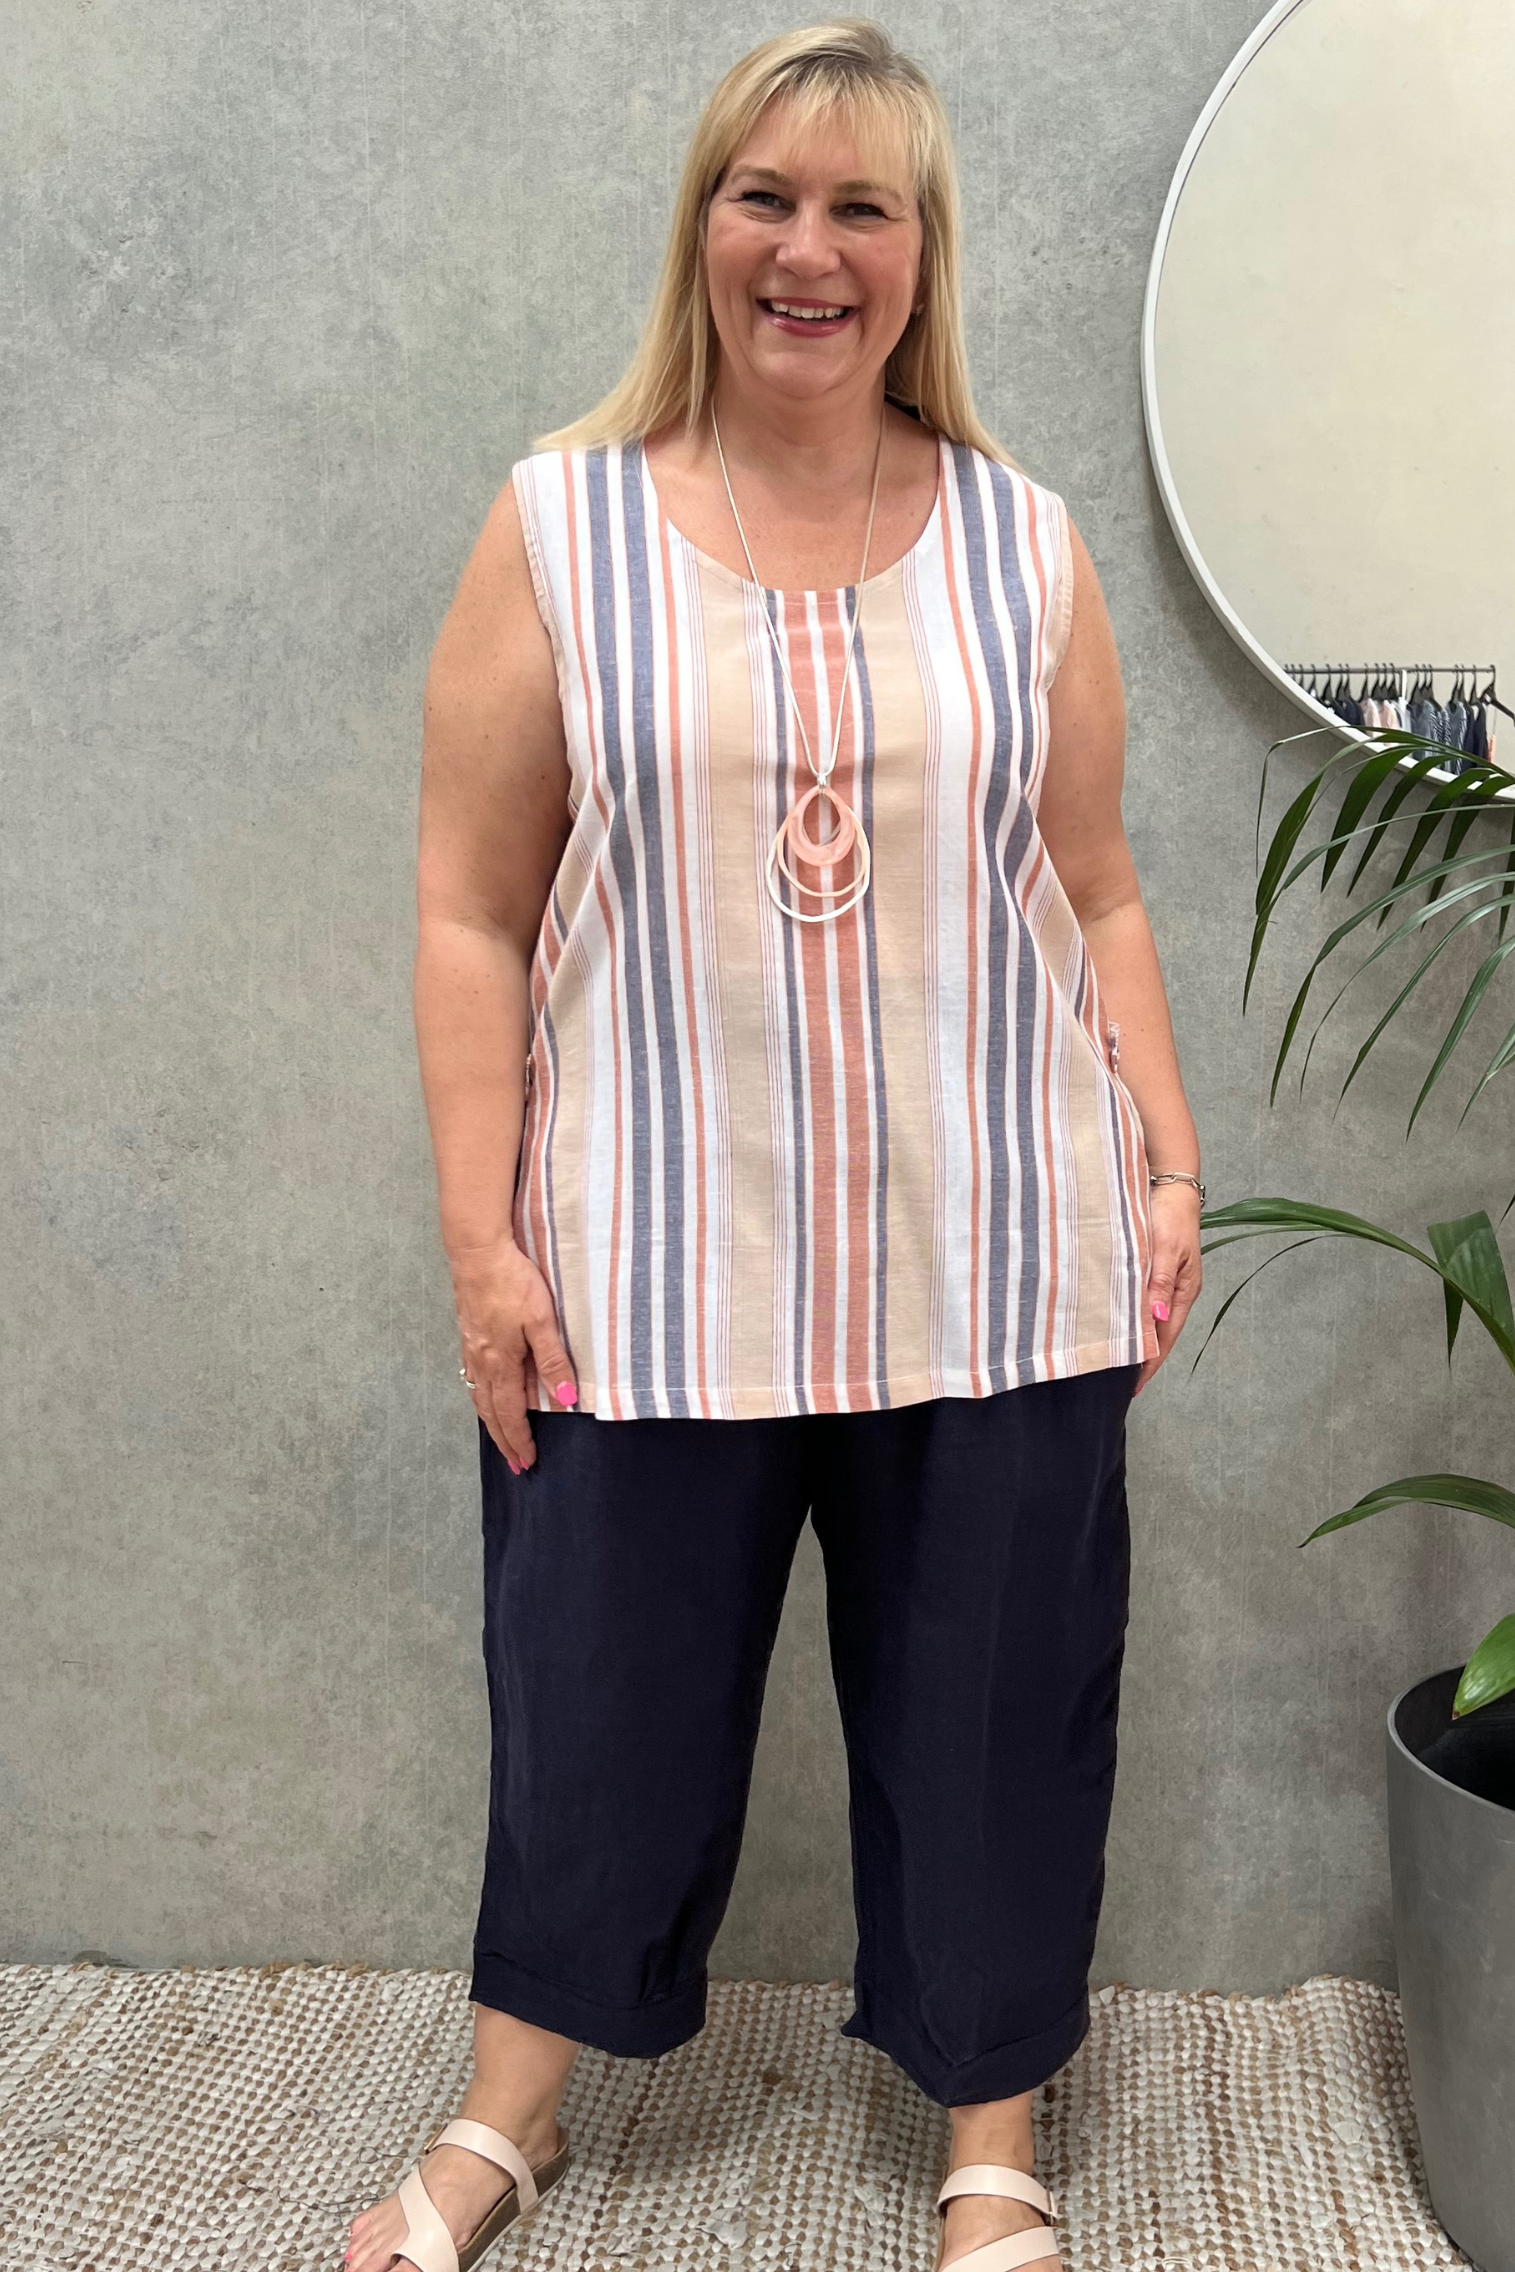 Kita Ku modelling a no sleeve cami of coral and grey stripes over a pant in navy in a retail setting.